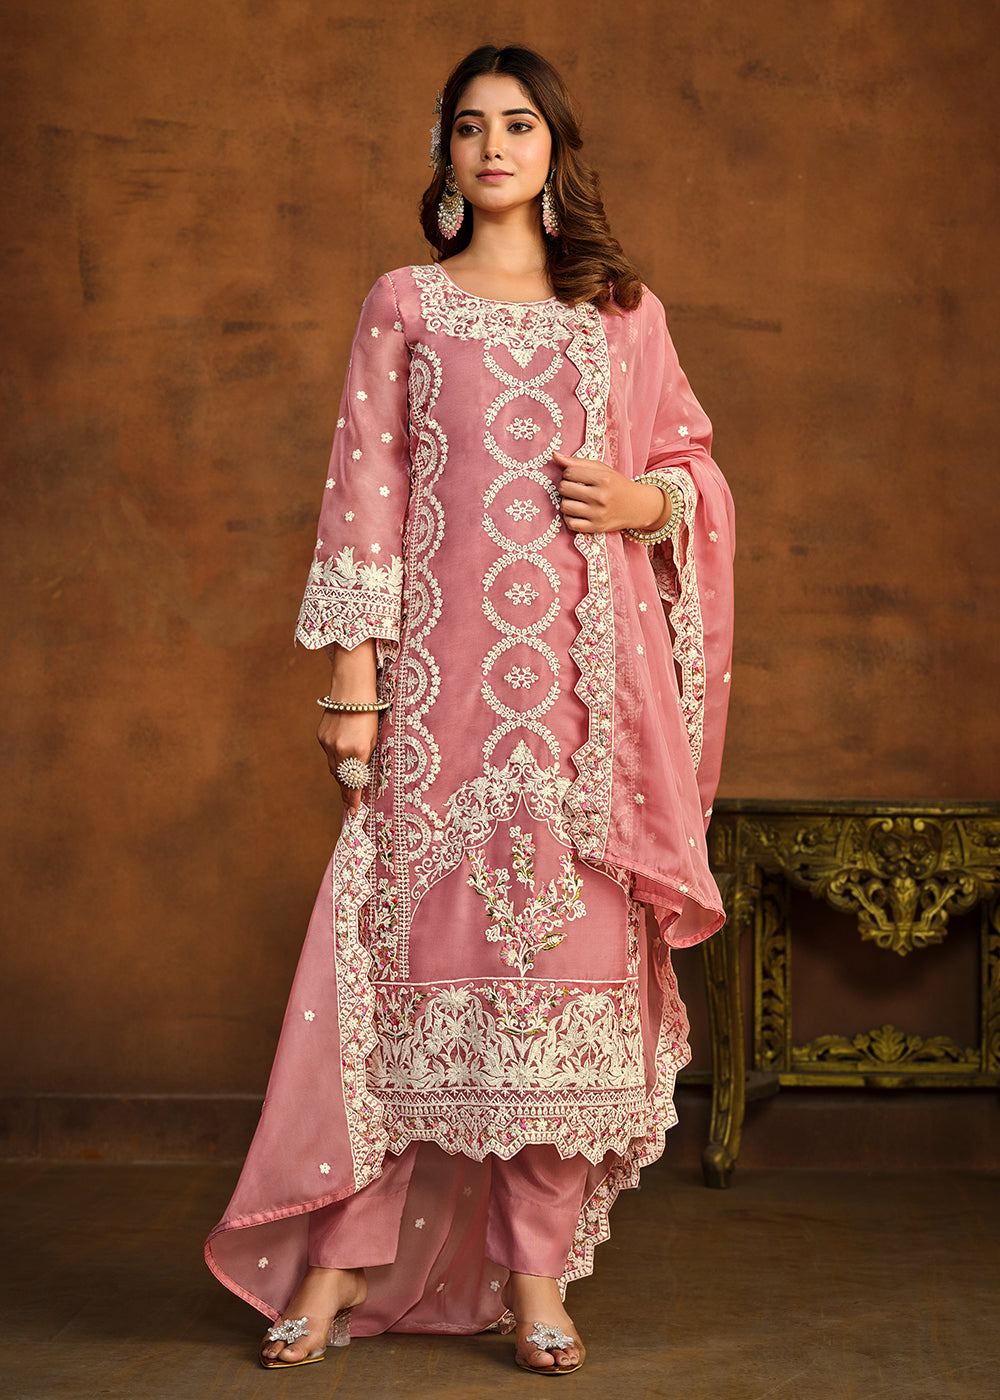 Buy Now Festive Style Pink Soft Organza Pant Style Salwar Suit Online in USA, UK, Canada, Germany, Australia & Worldwide at Empress Clothing. 